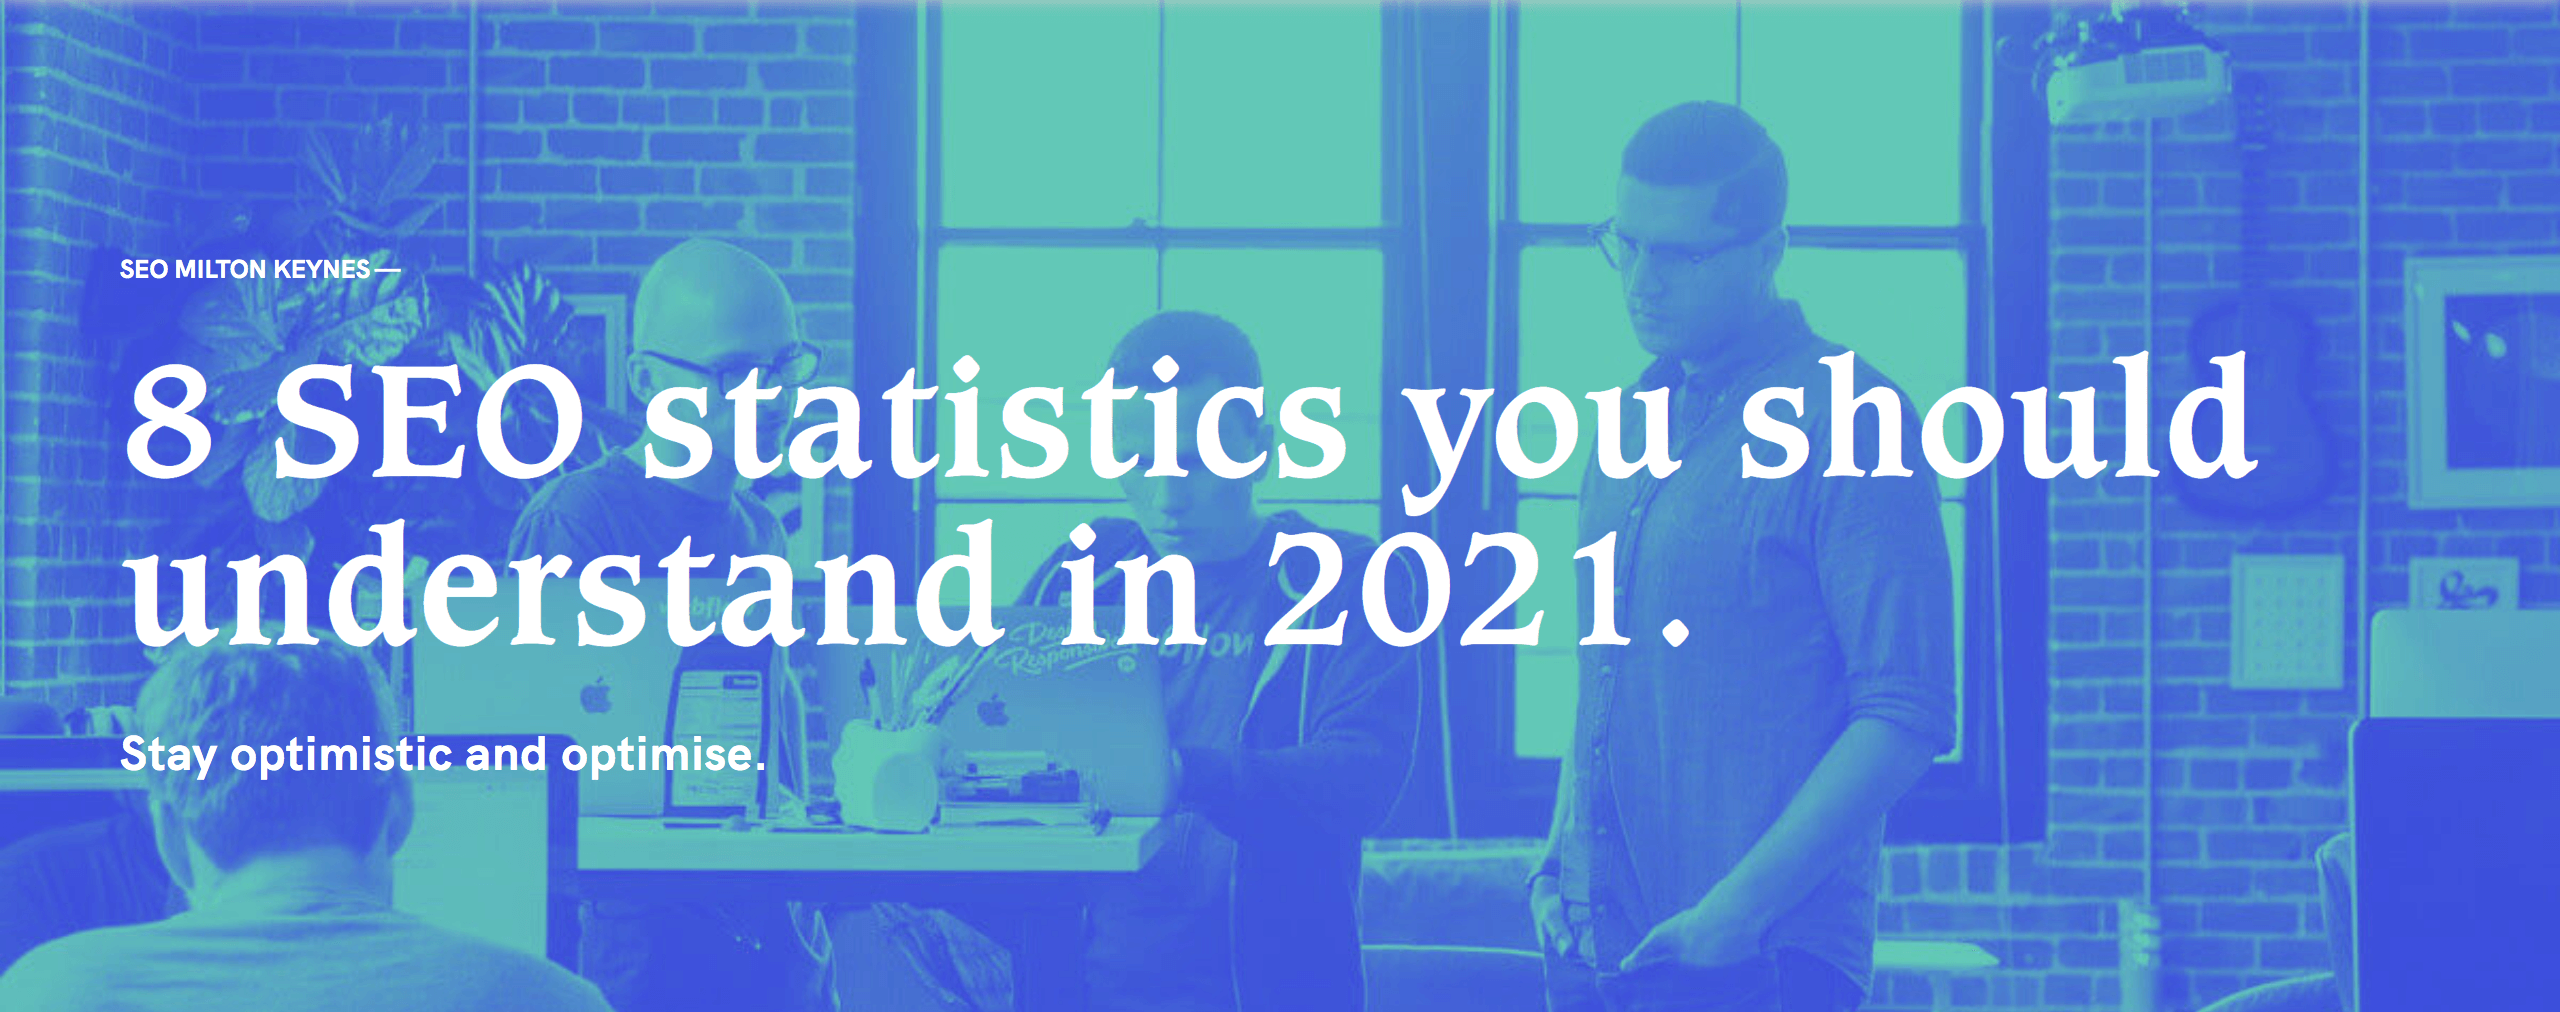 8 SEO statistics you need to understand in 2021